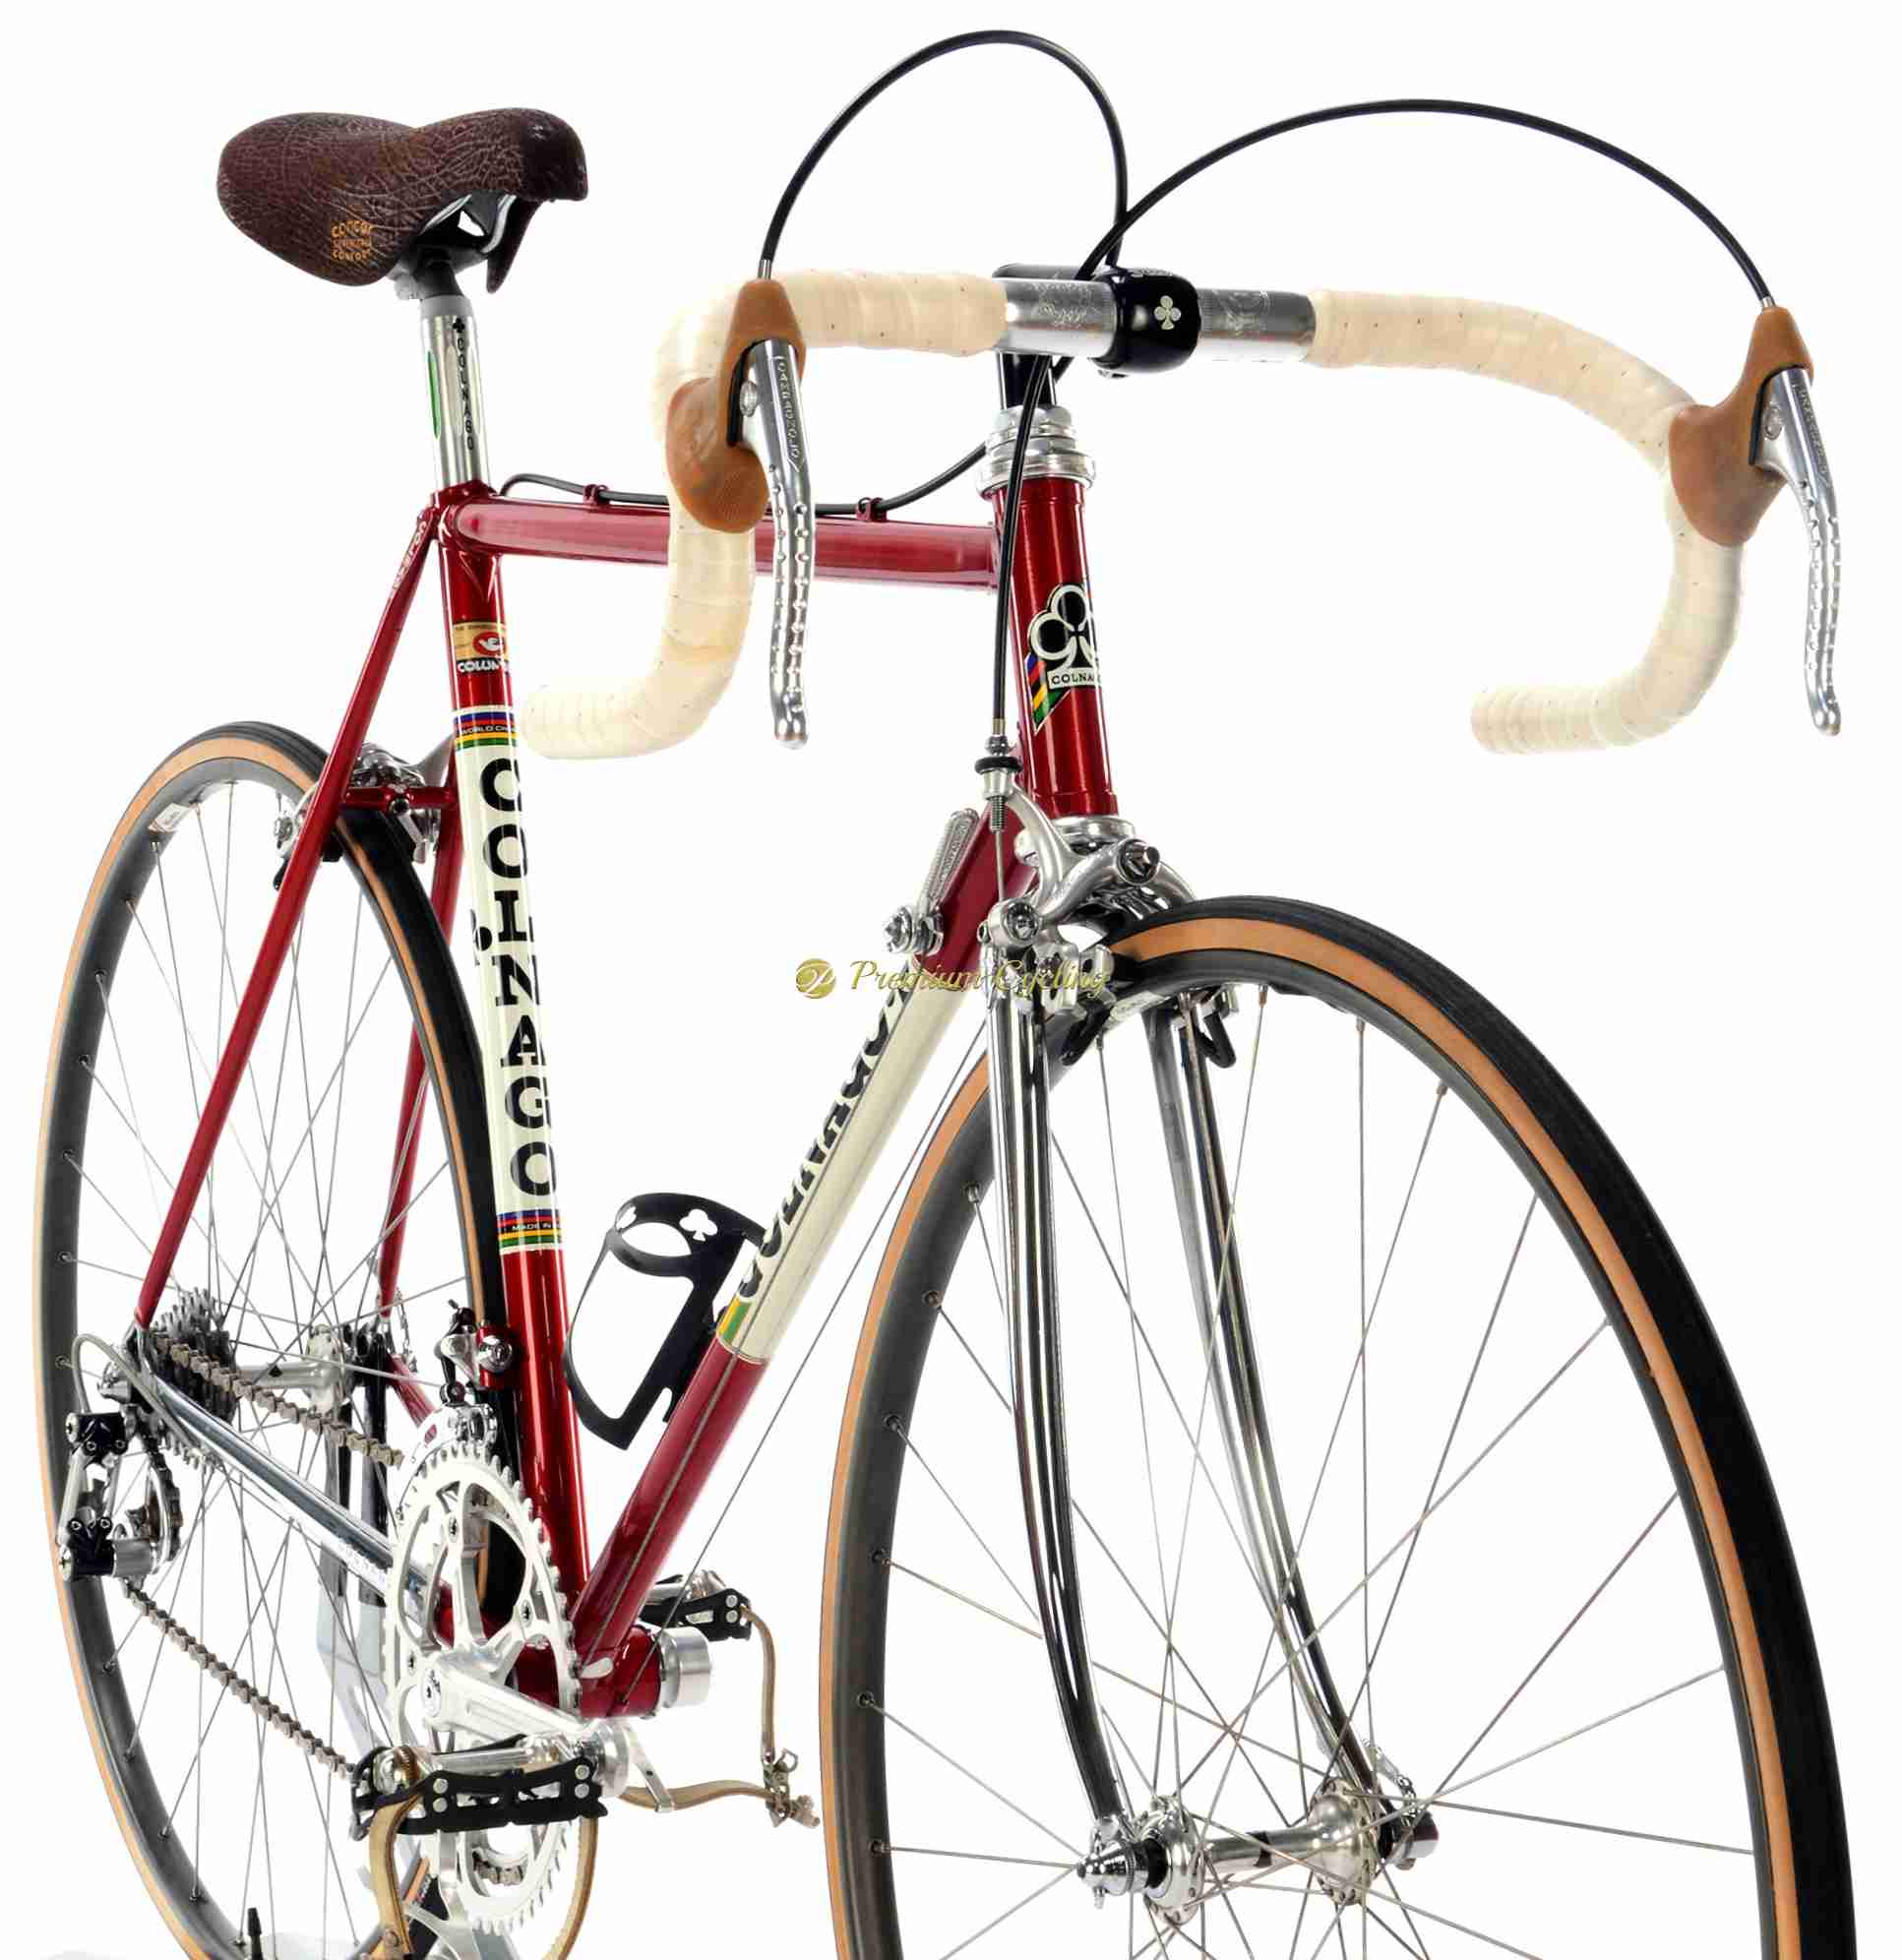 1984 COLNAGO Nuovo Mexico Profil, Campagnolo Super Record, new old stock, vintage luxury vintage steel bike by Premium Cycling